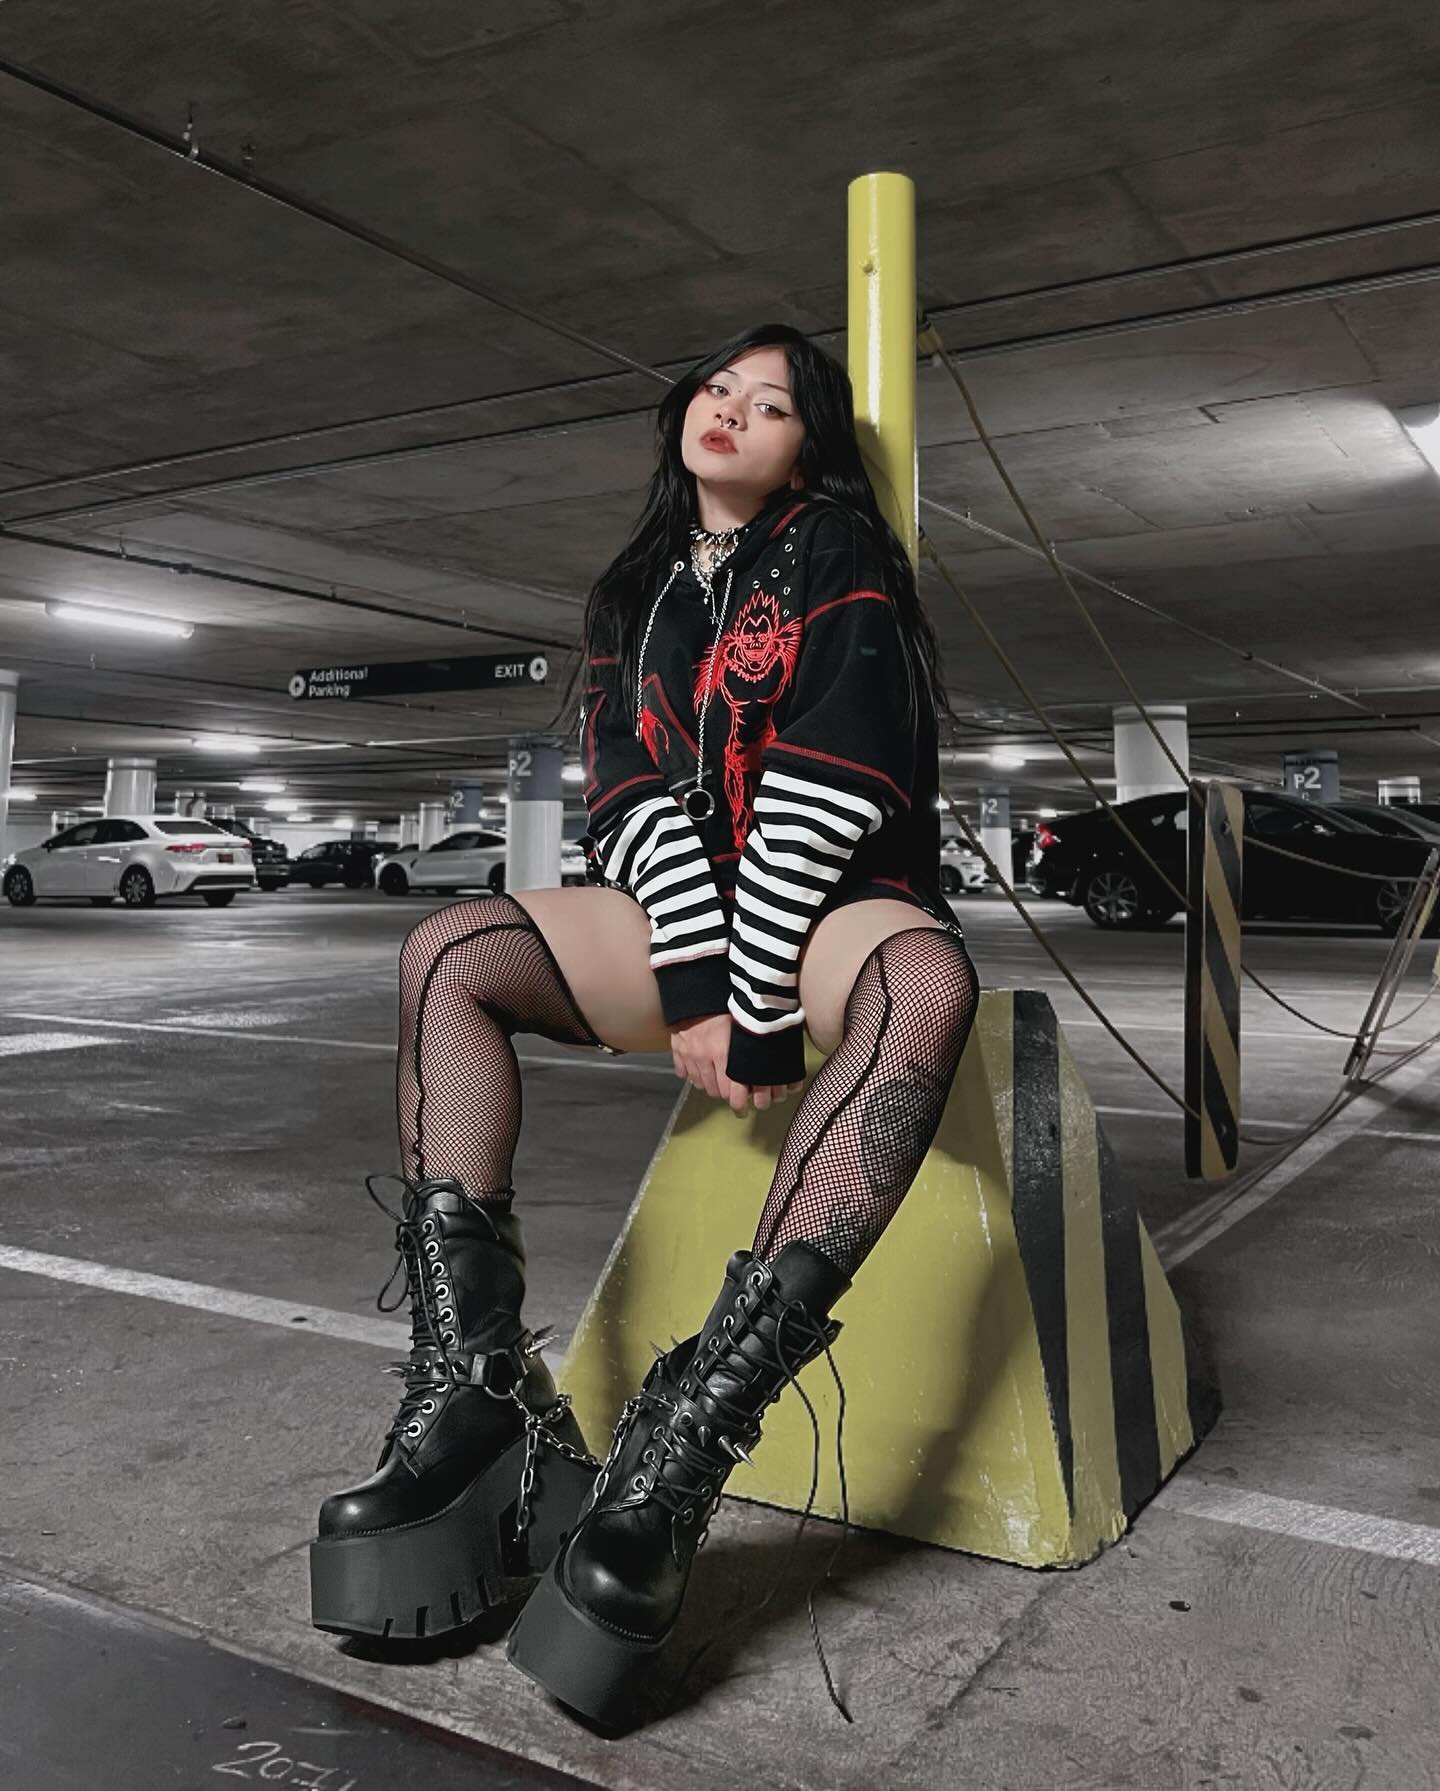 Gotta be the most emo mofo in the local parking lot 
.
Top from @hottopic 
Shoes and leggings from @dollskill @houseofwidow 
.
.
.
.
.
.
#gothgirl #gothgoth #internetgirl #y2k #egirl #outfitinspiration #aesthetic #ootd #piercings #alternative  #animegirl #grungeaesthetic #grungestyle #harajuku #gothfashion #streetstyle #emo #aestoutfit #emogirl #fashion #explore #demonia  #darkcore  #dollskill #hottopic #sponsoredbyHT #HTFxDeathNote #houseofwidow